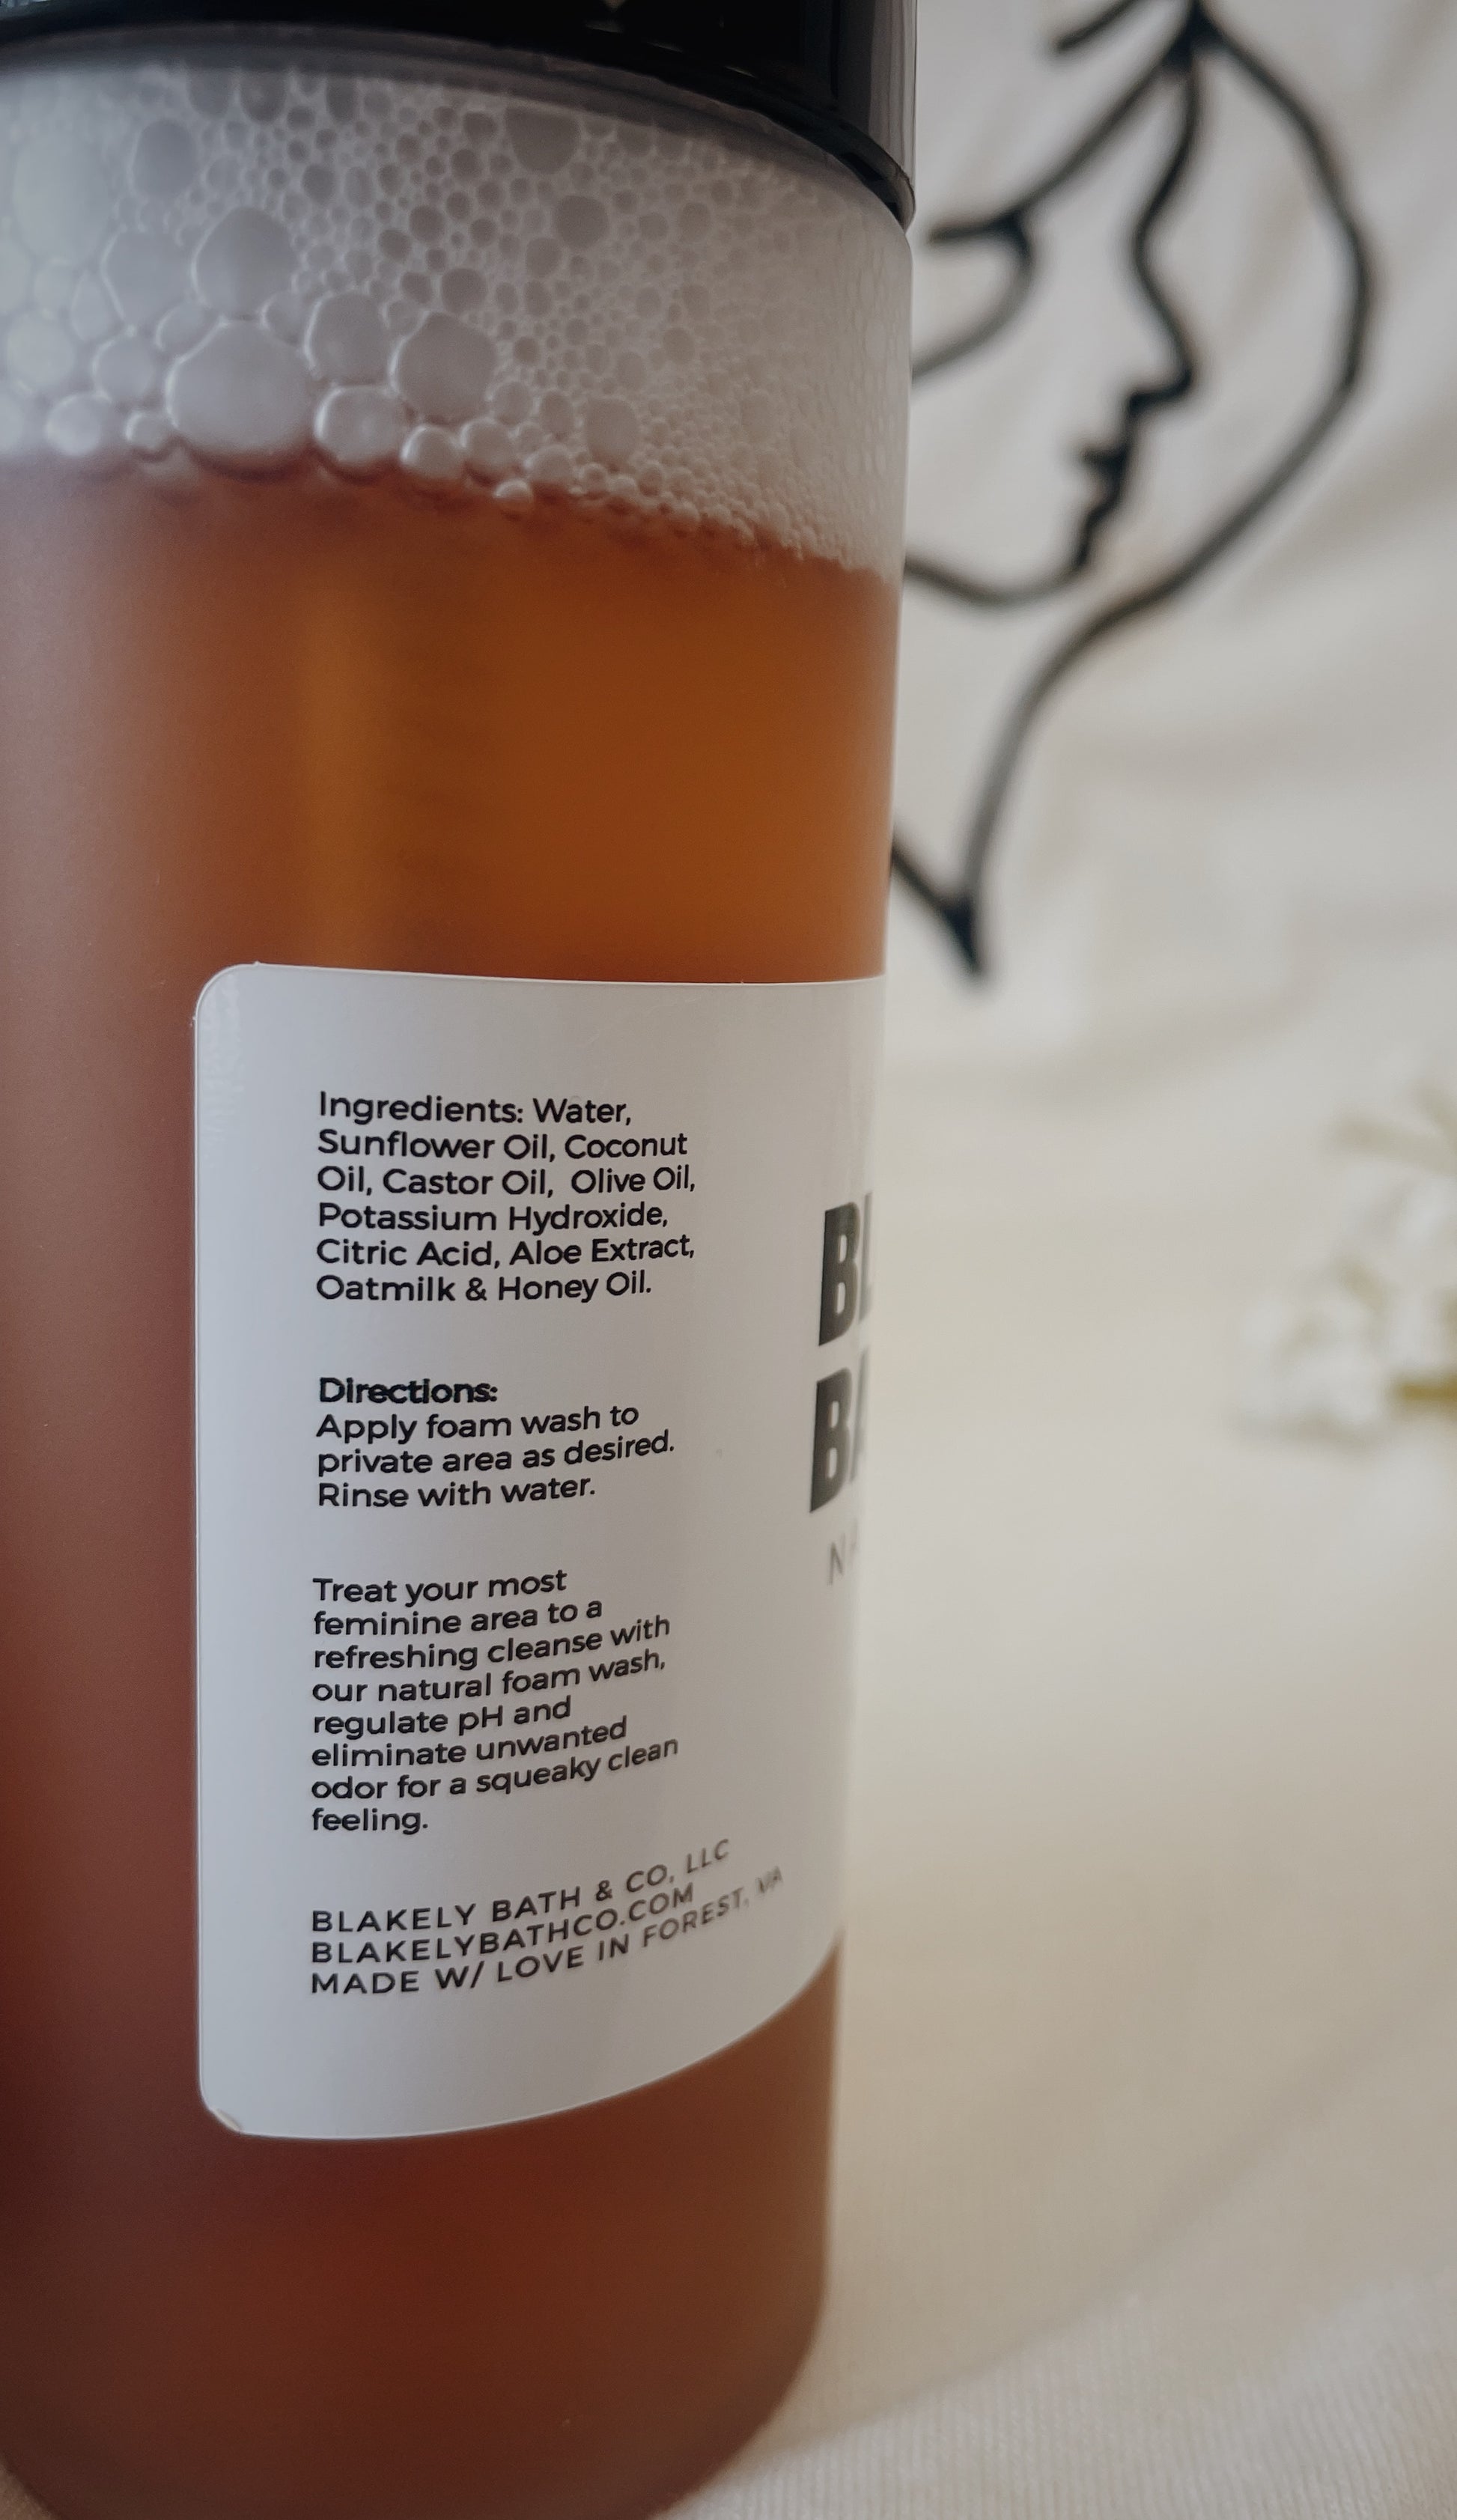 Side of a bottle showing the ingredients and directions